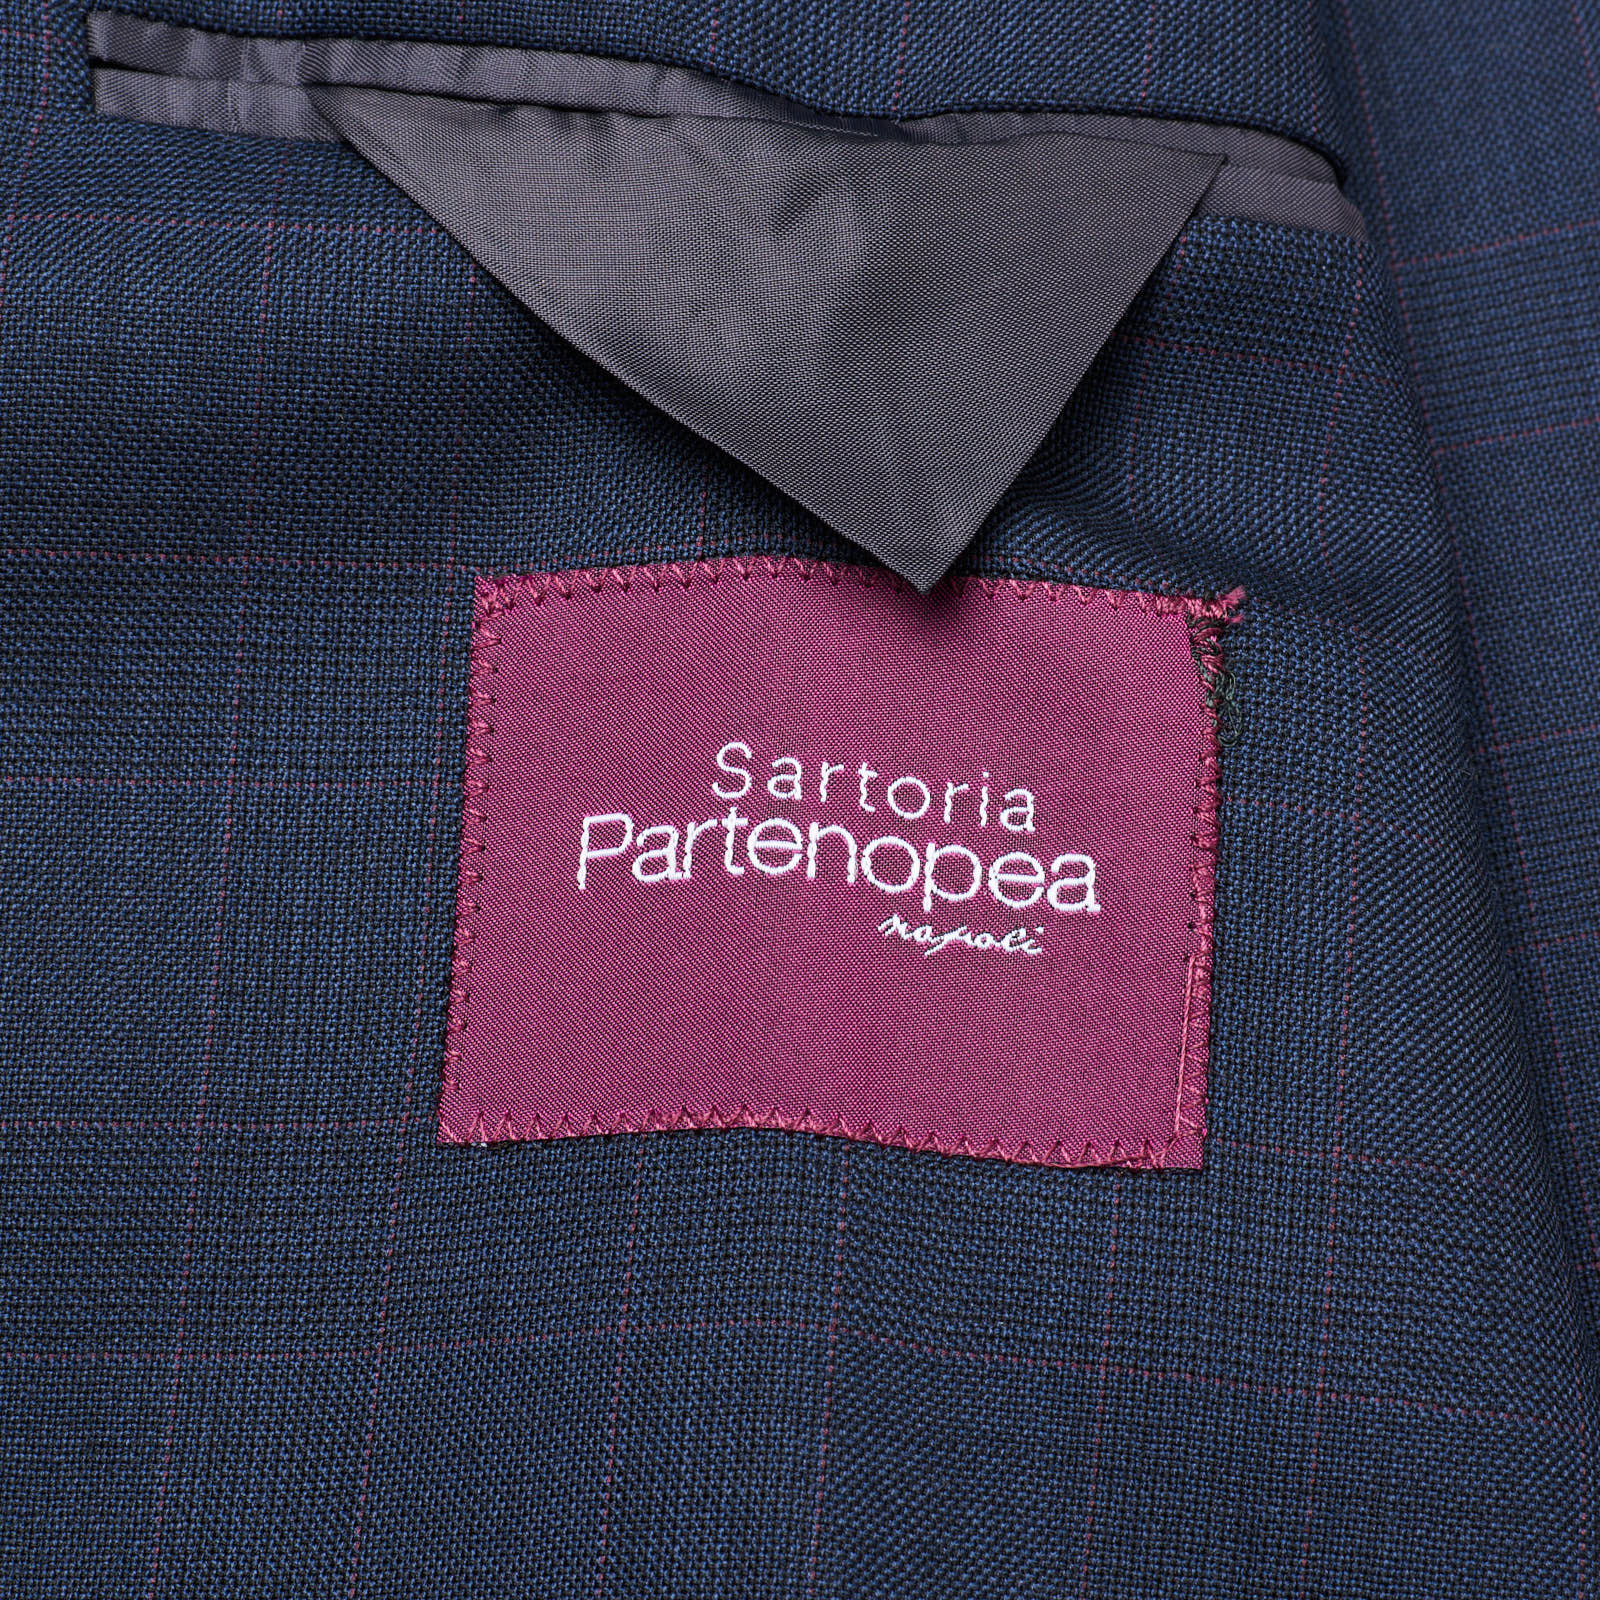 SARTORIA PARTENOPEA Blue Plaid Wool Unlined Suit NEW  Current Model